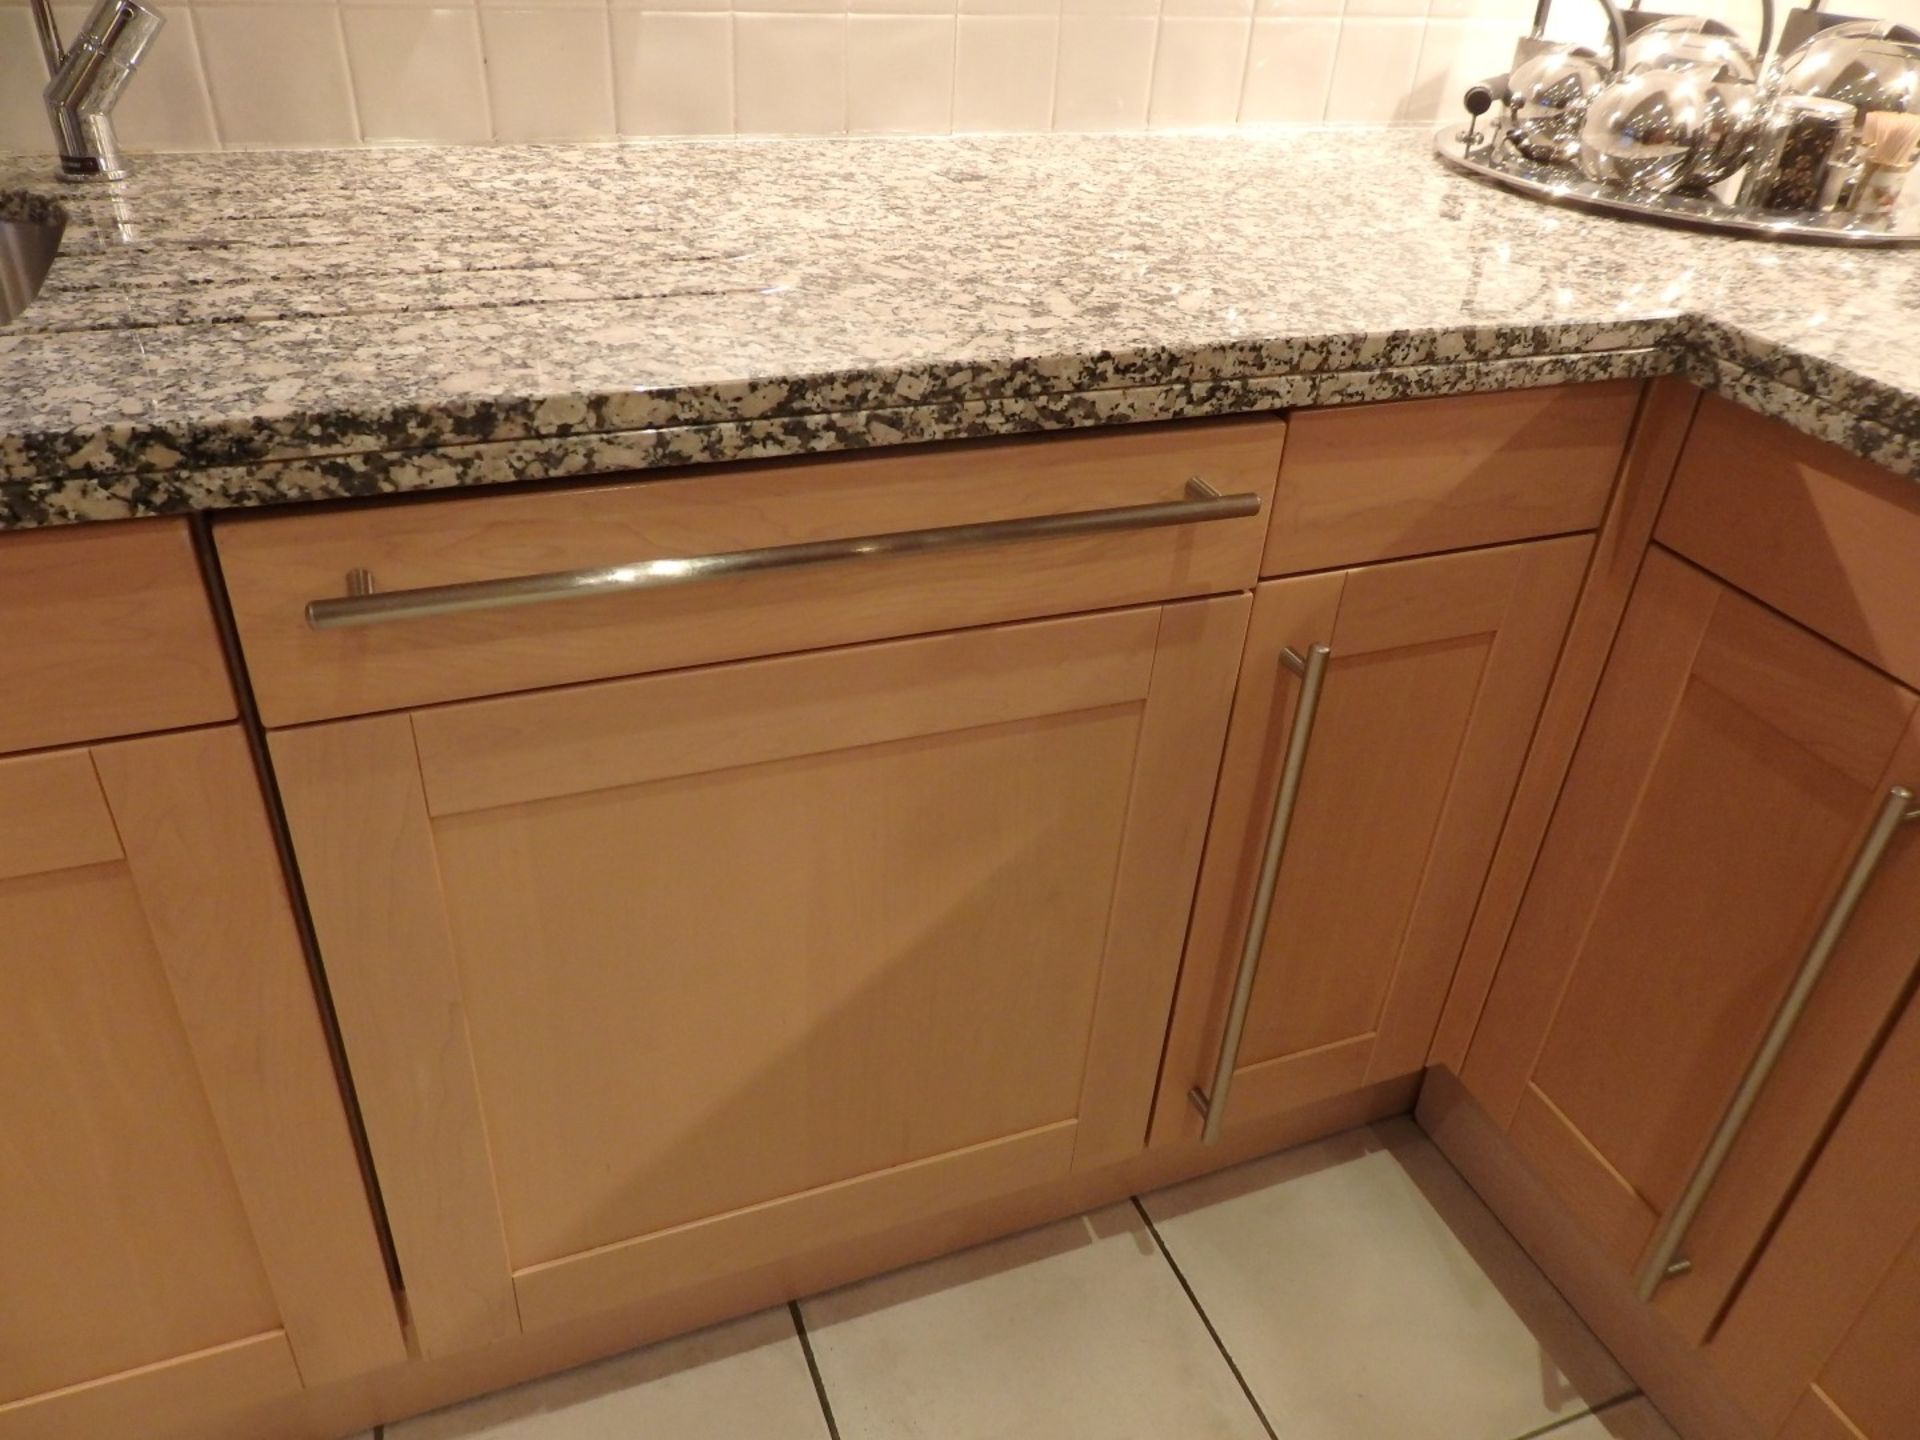 1 x Siematic Fitted Kitchen With Beech Shaker Style Doors, Granite Worktops, Central Island and - Image 45 of 148